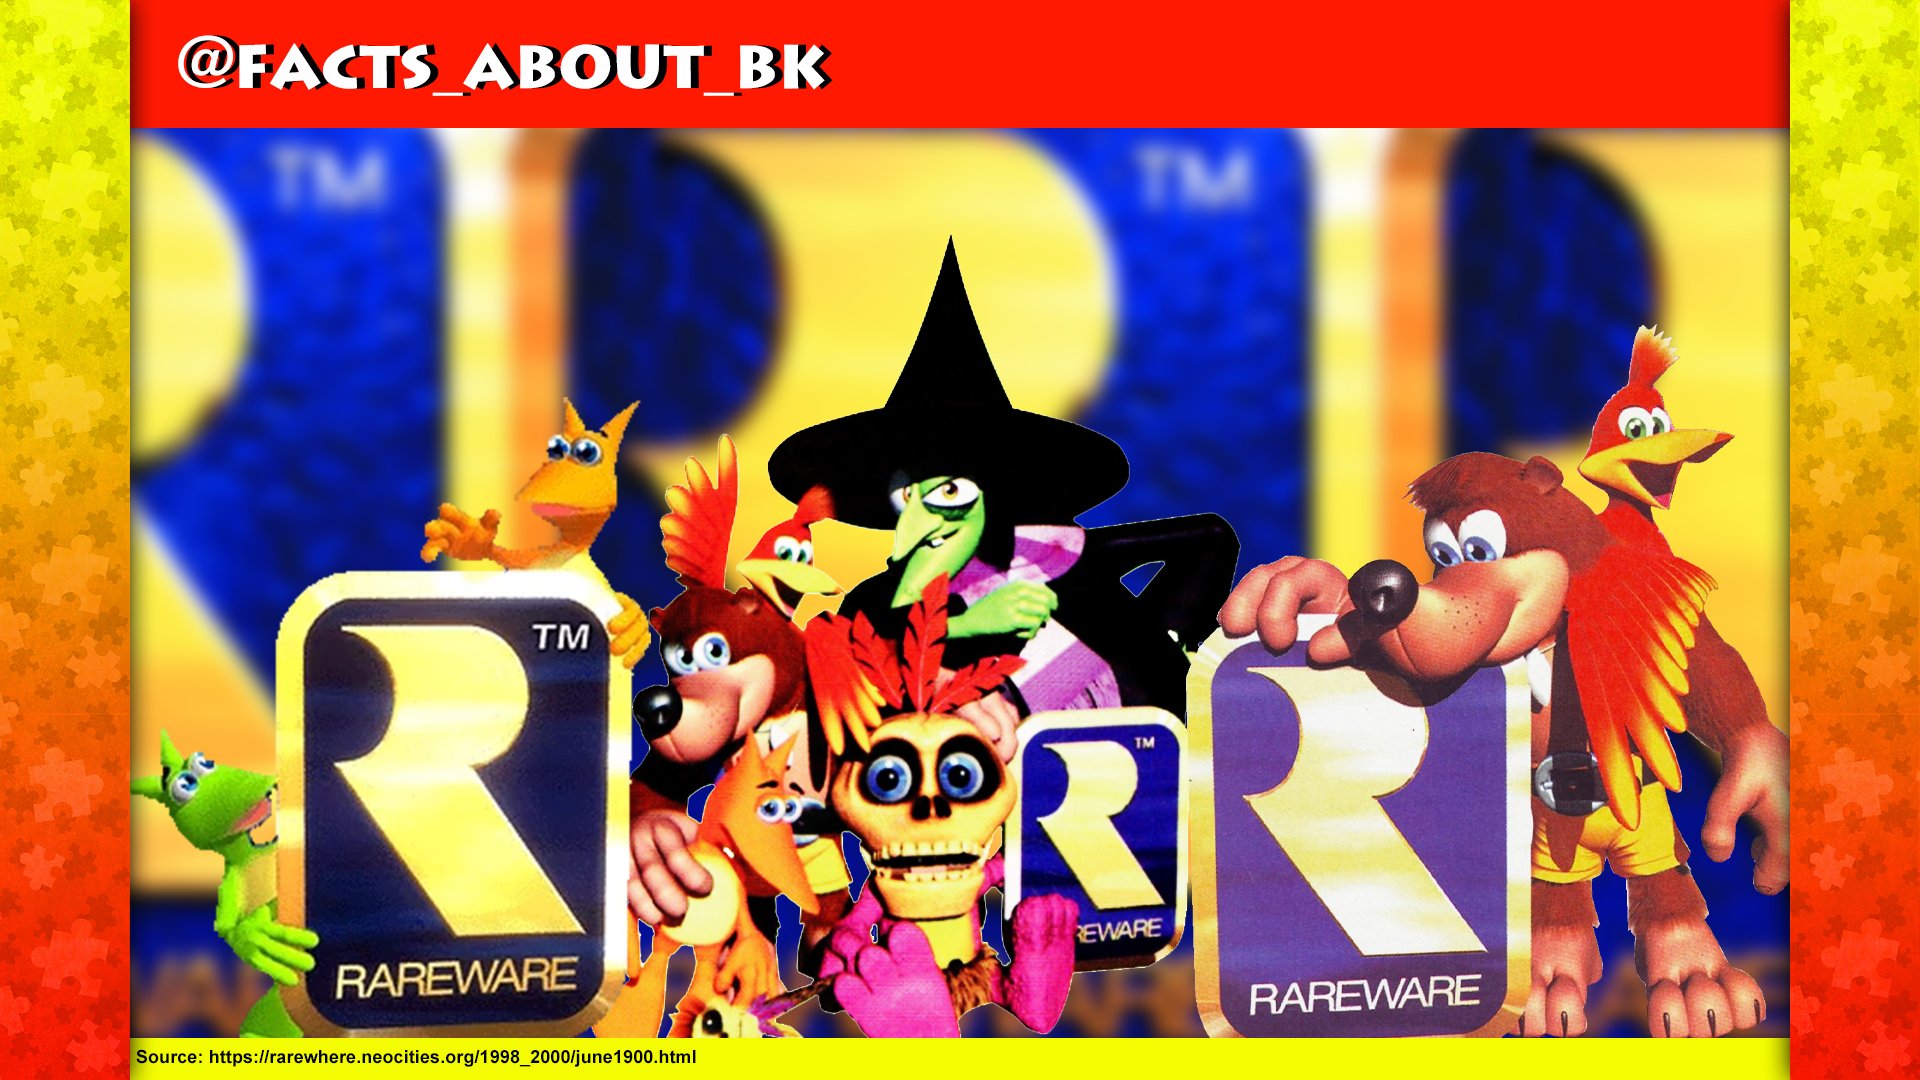 Facts about Banjo-Kazooie 🪺 on X: Before the #BanjoKazooie